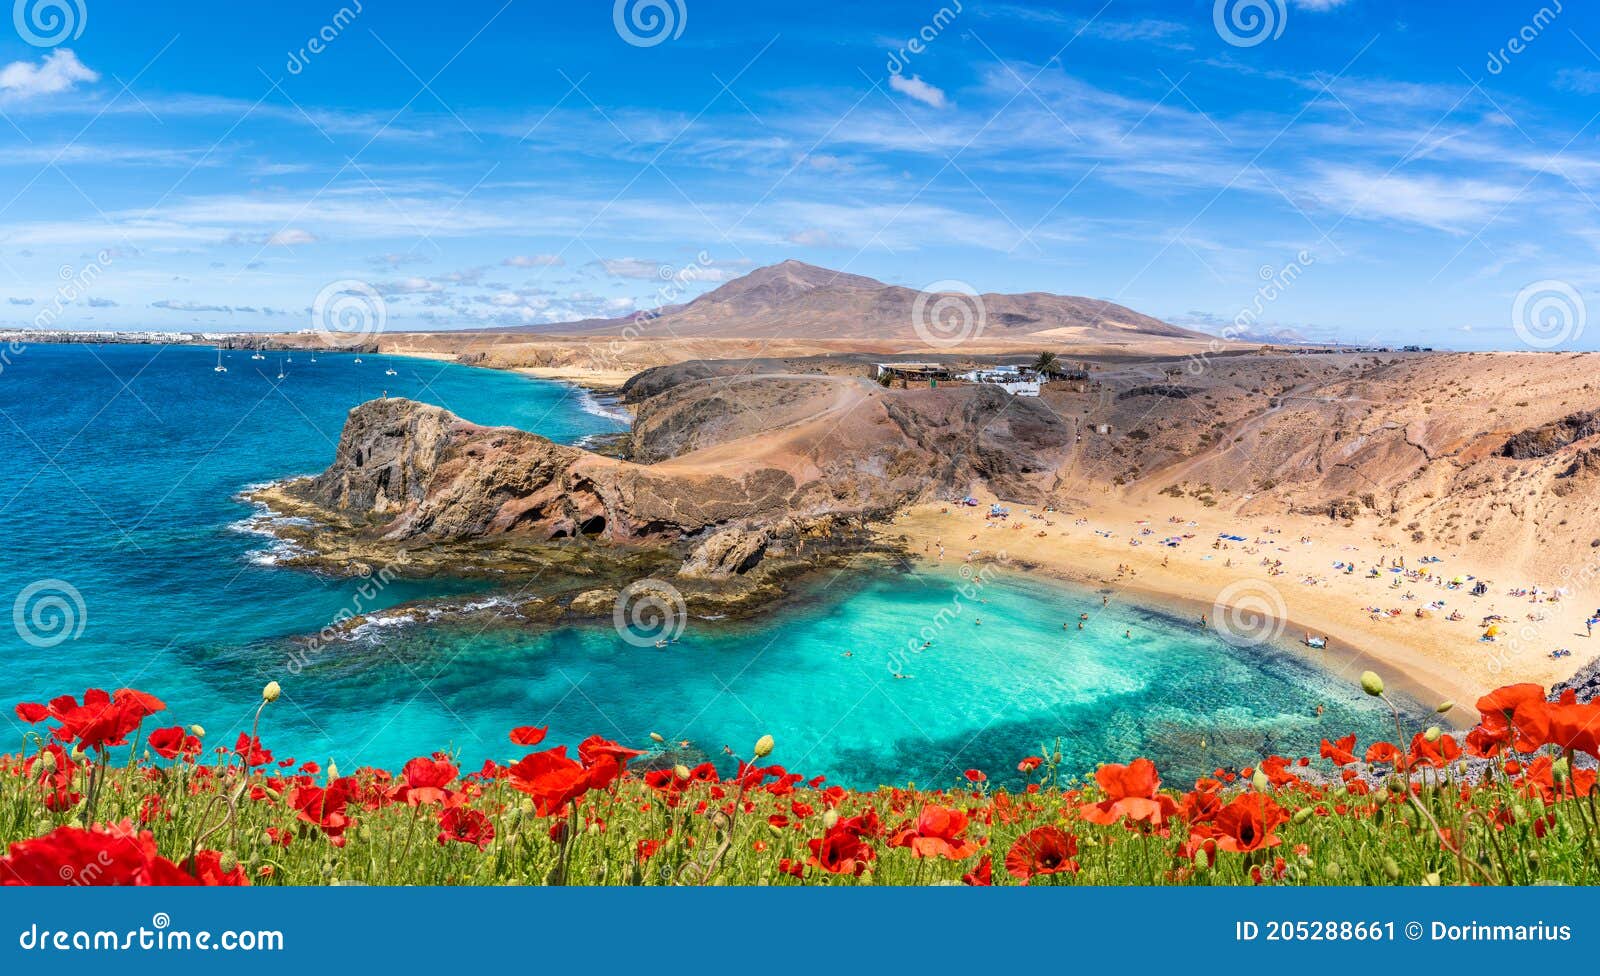 landscape with papagayo beach